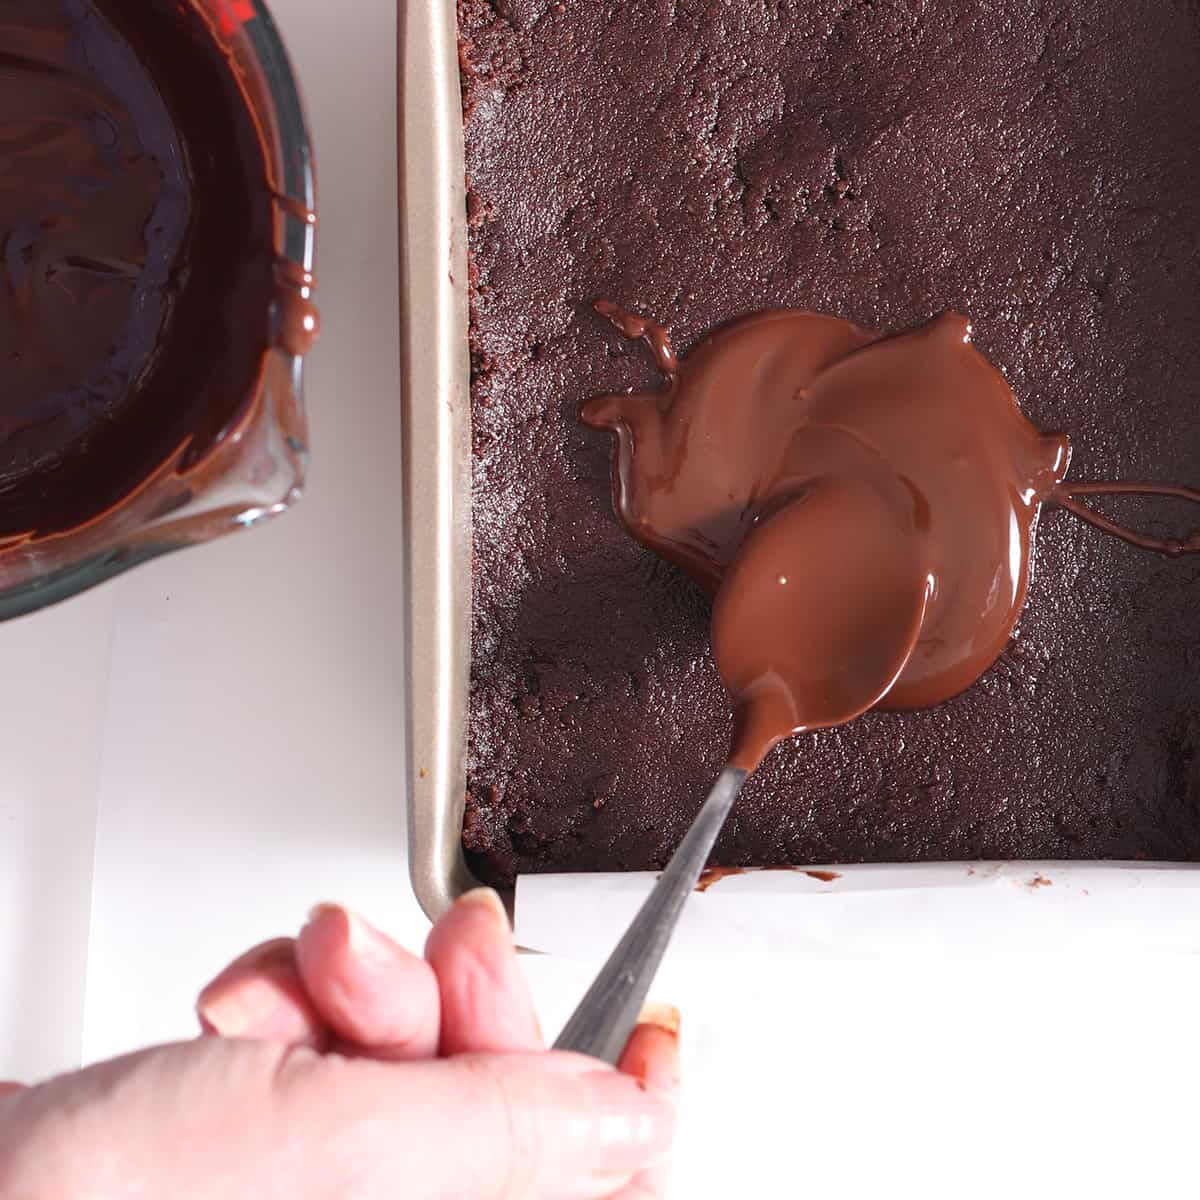 chocolate being spread by a spoon on a batter